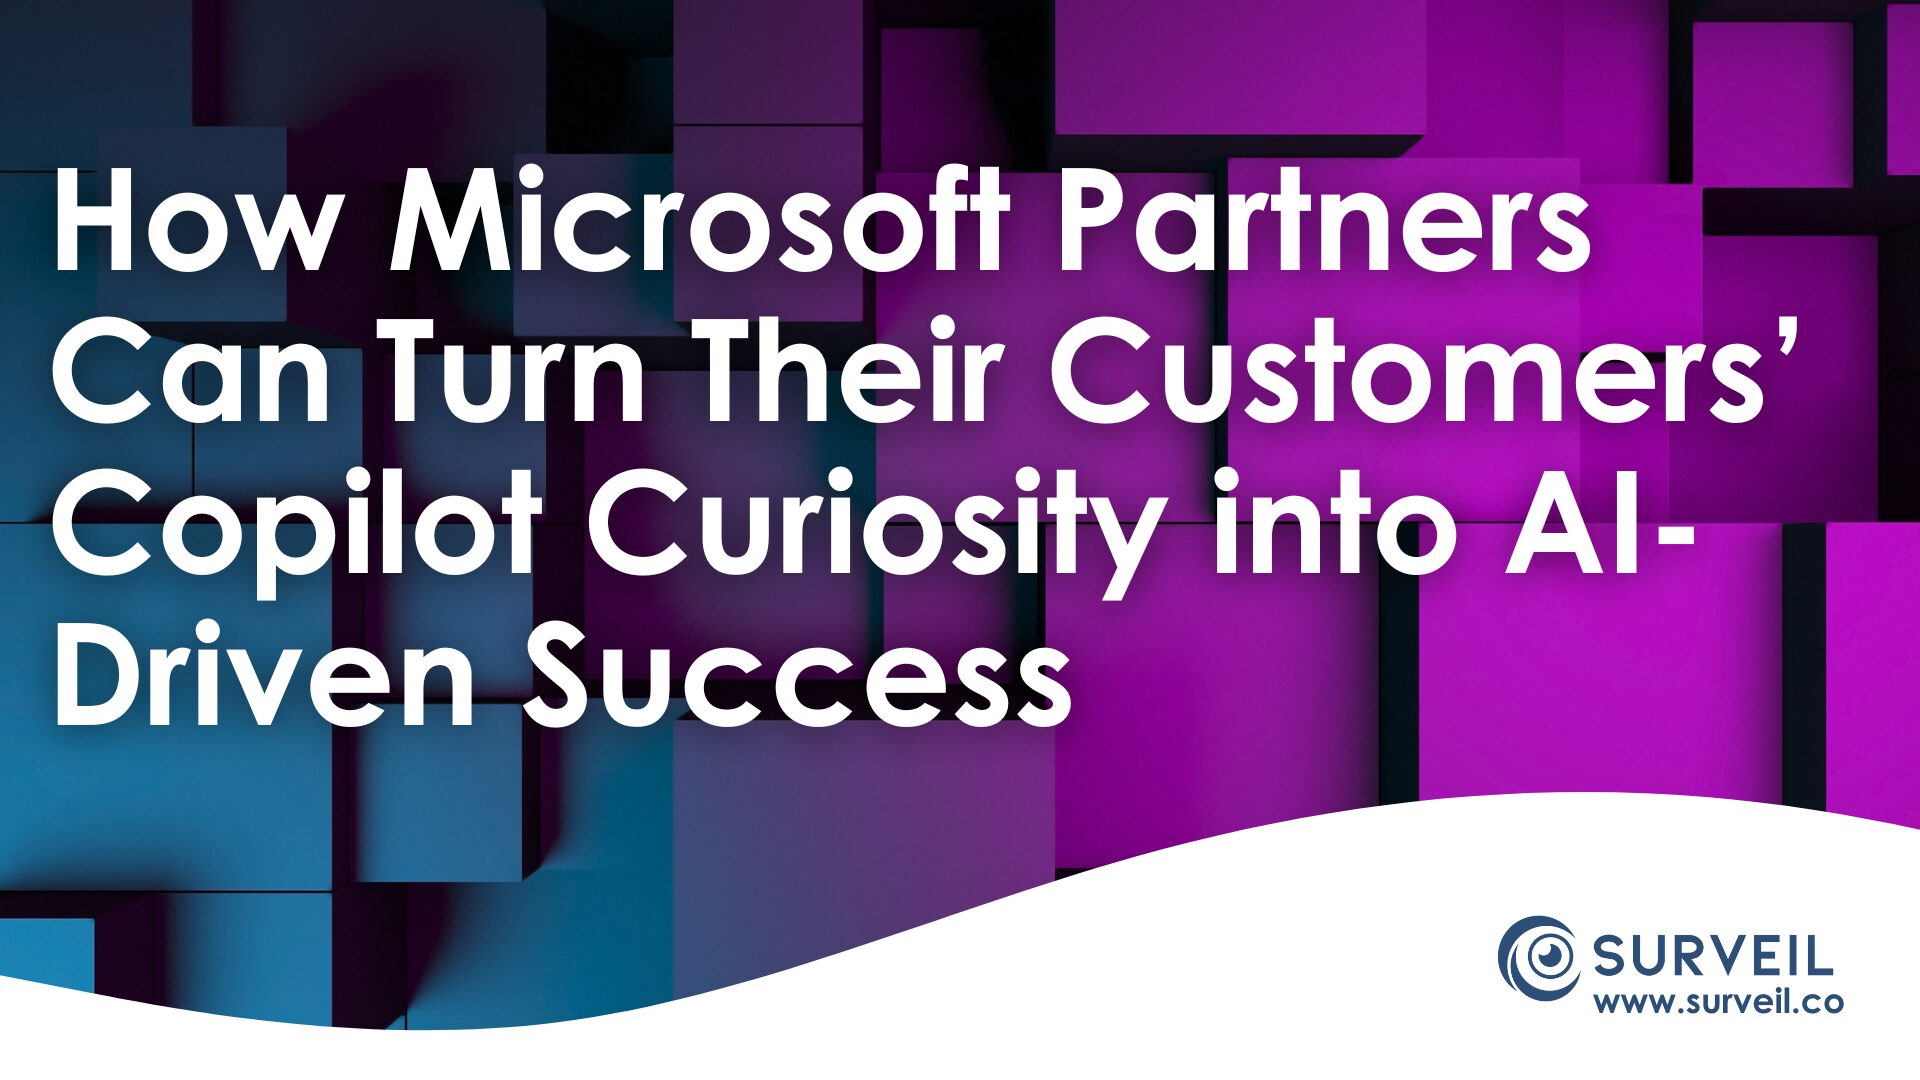 How Microsoft Partners Can Turn Their Customers’ Copilot Curiosity into AI-Driven Success